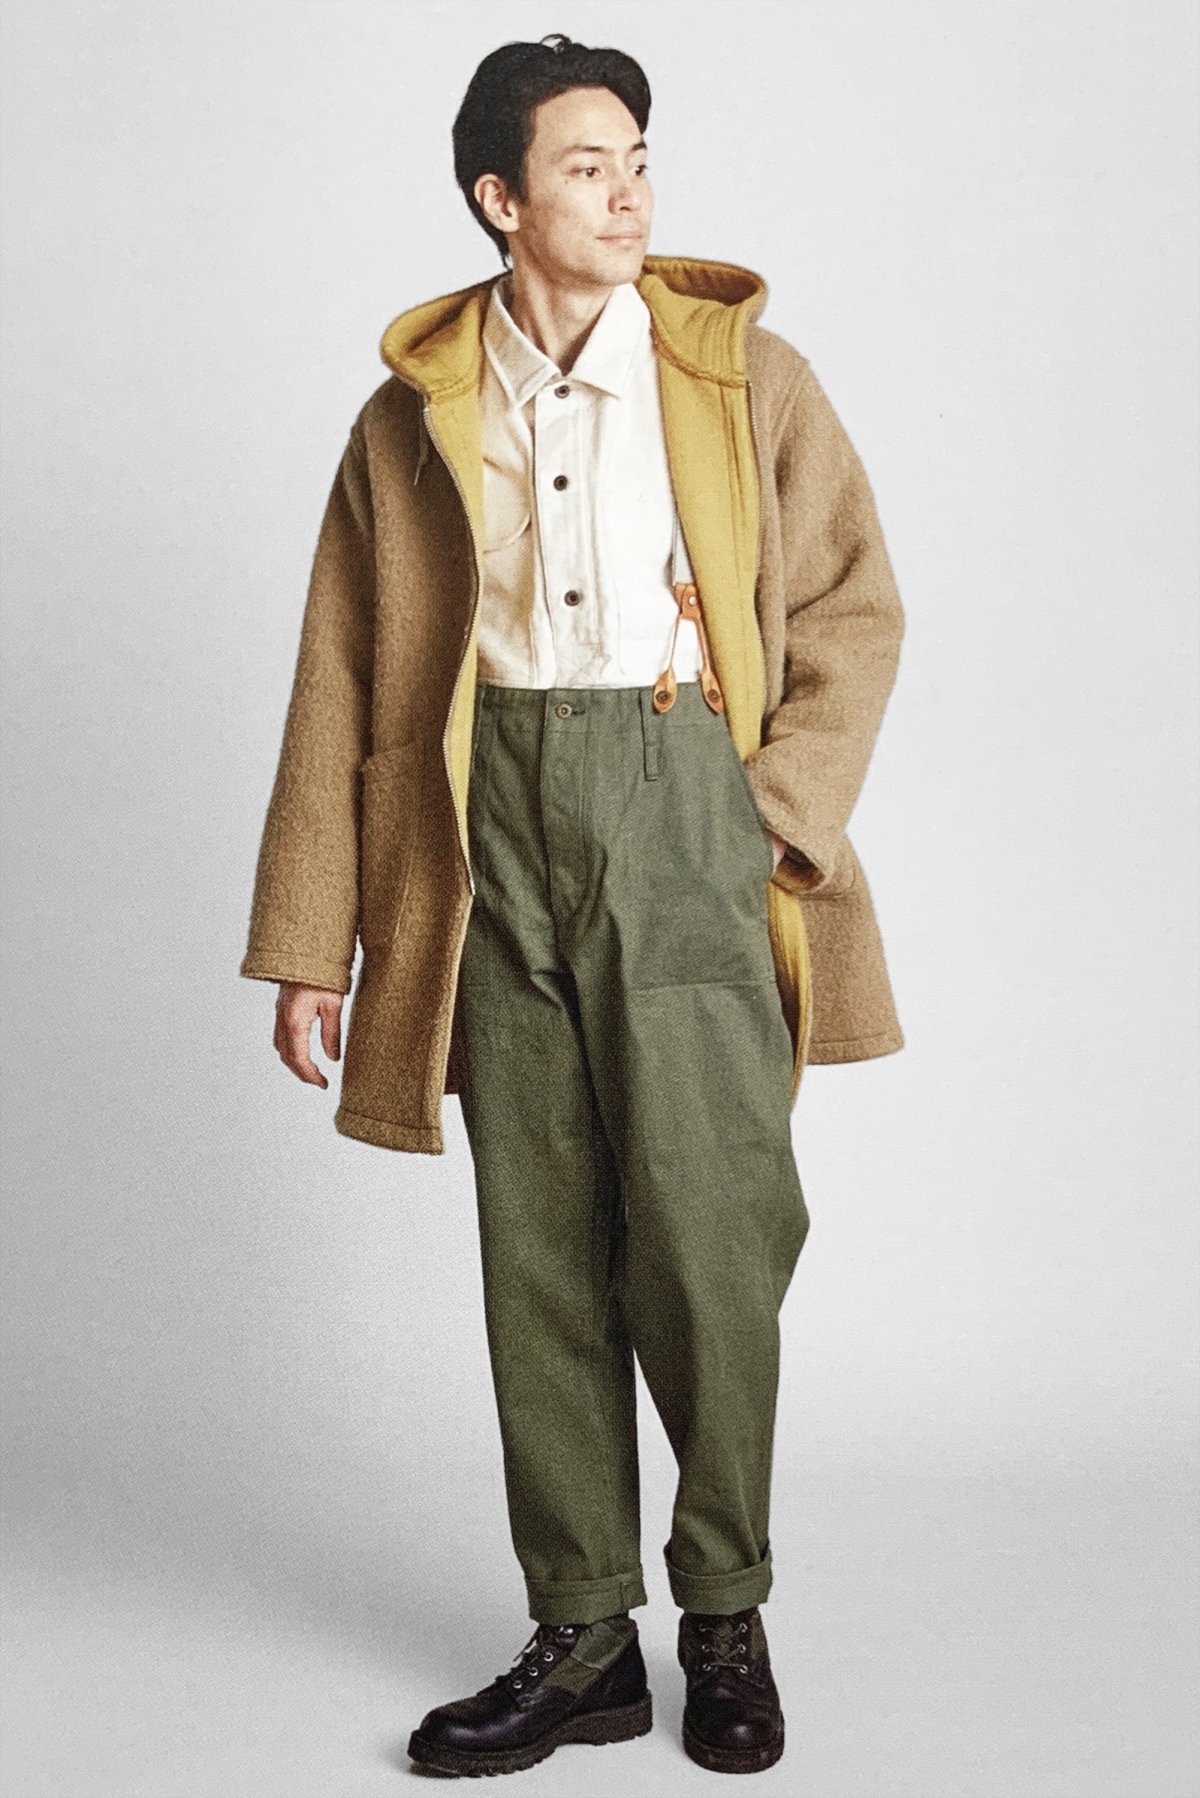 Nigel Cabourn ナイジェル・ケーボン 通販 正規店 フェートン - Phaeton Smart Clothes Online Store